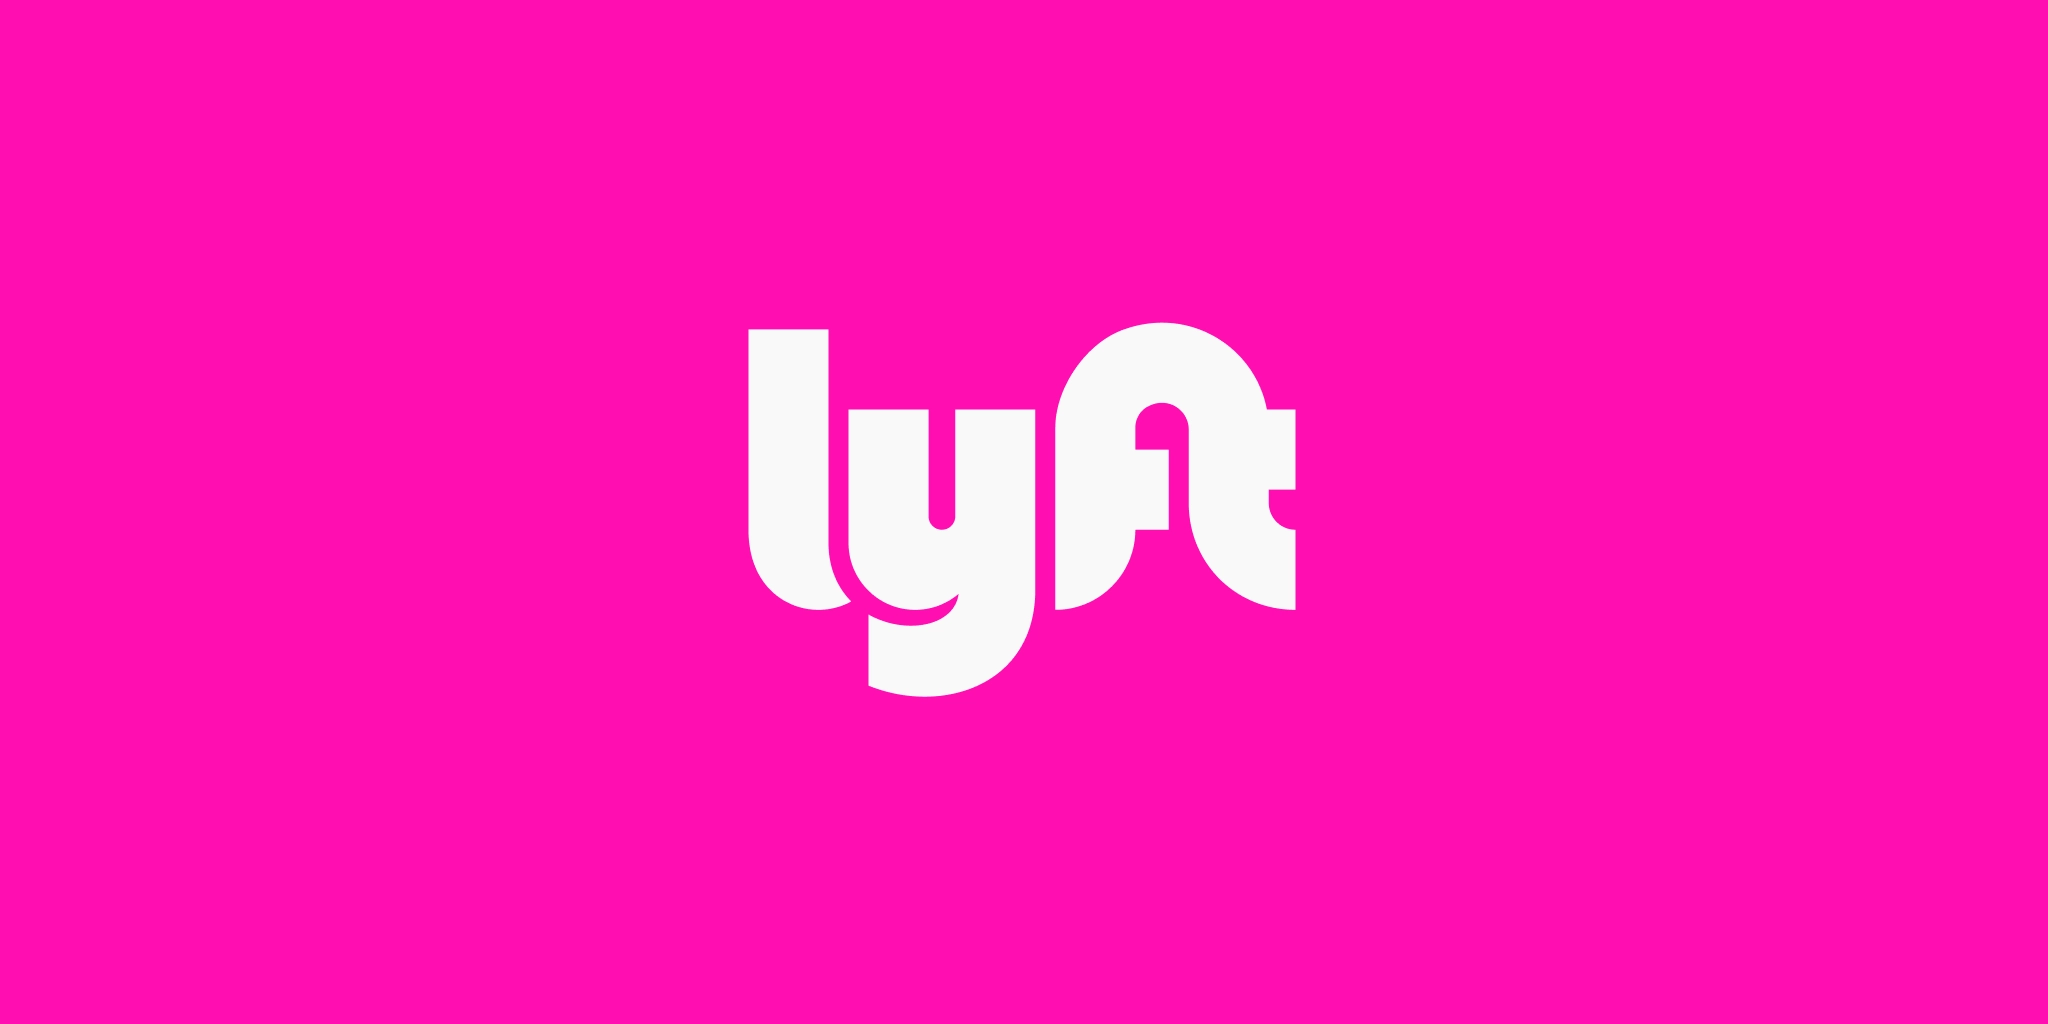 Open Graph image example by Lyft